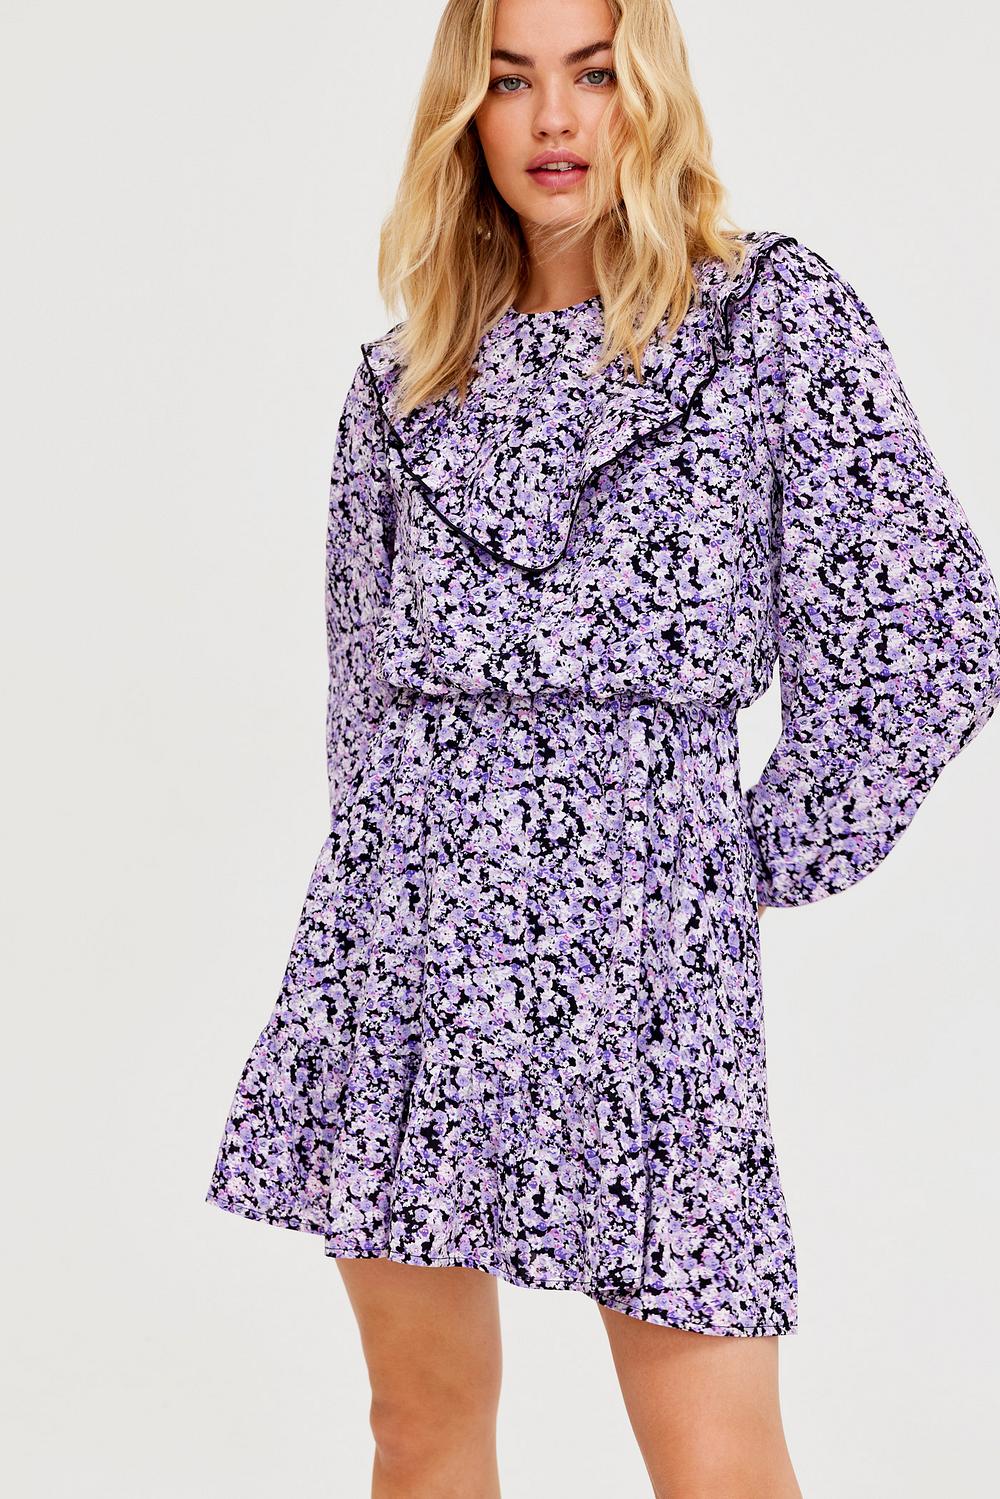 Lilac dress with floral print